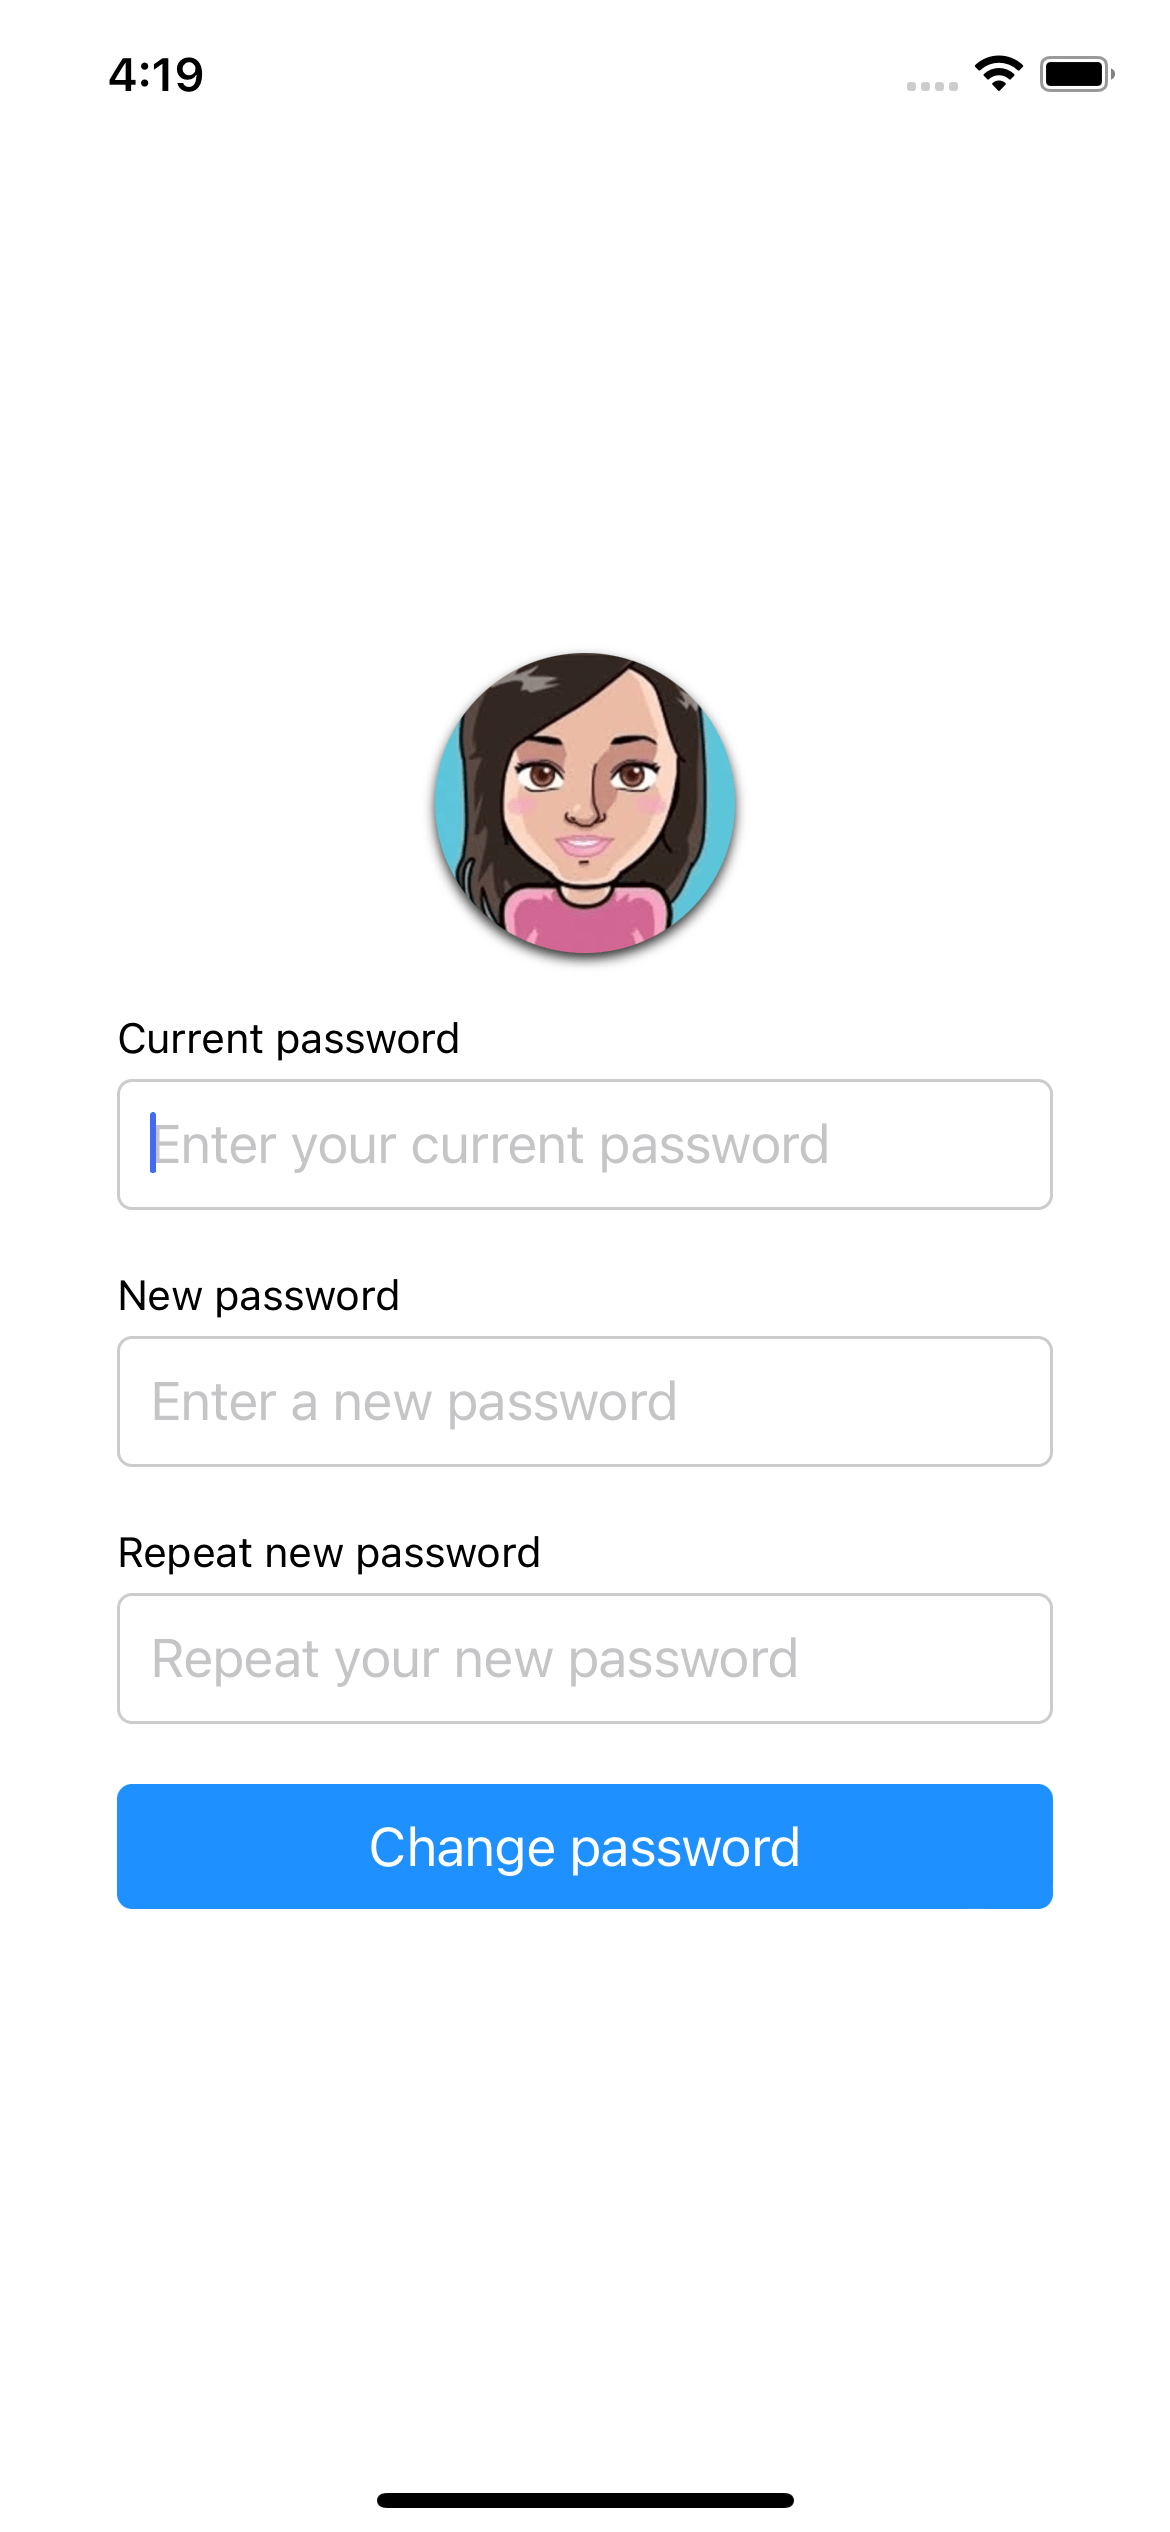 React native template. Change password form